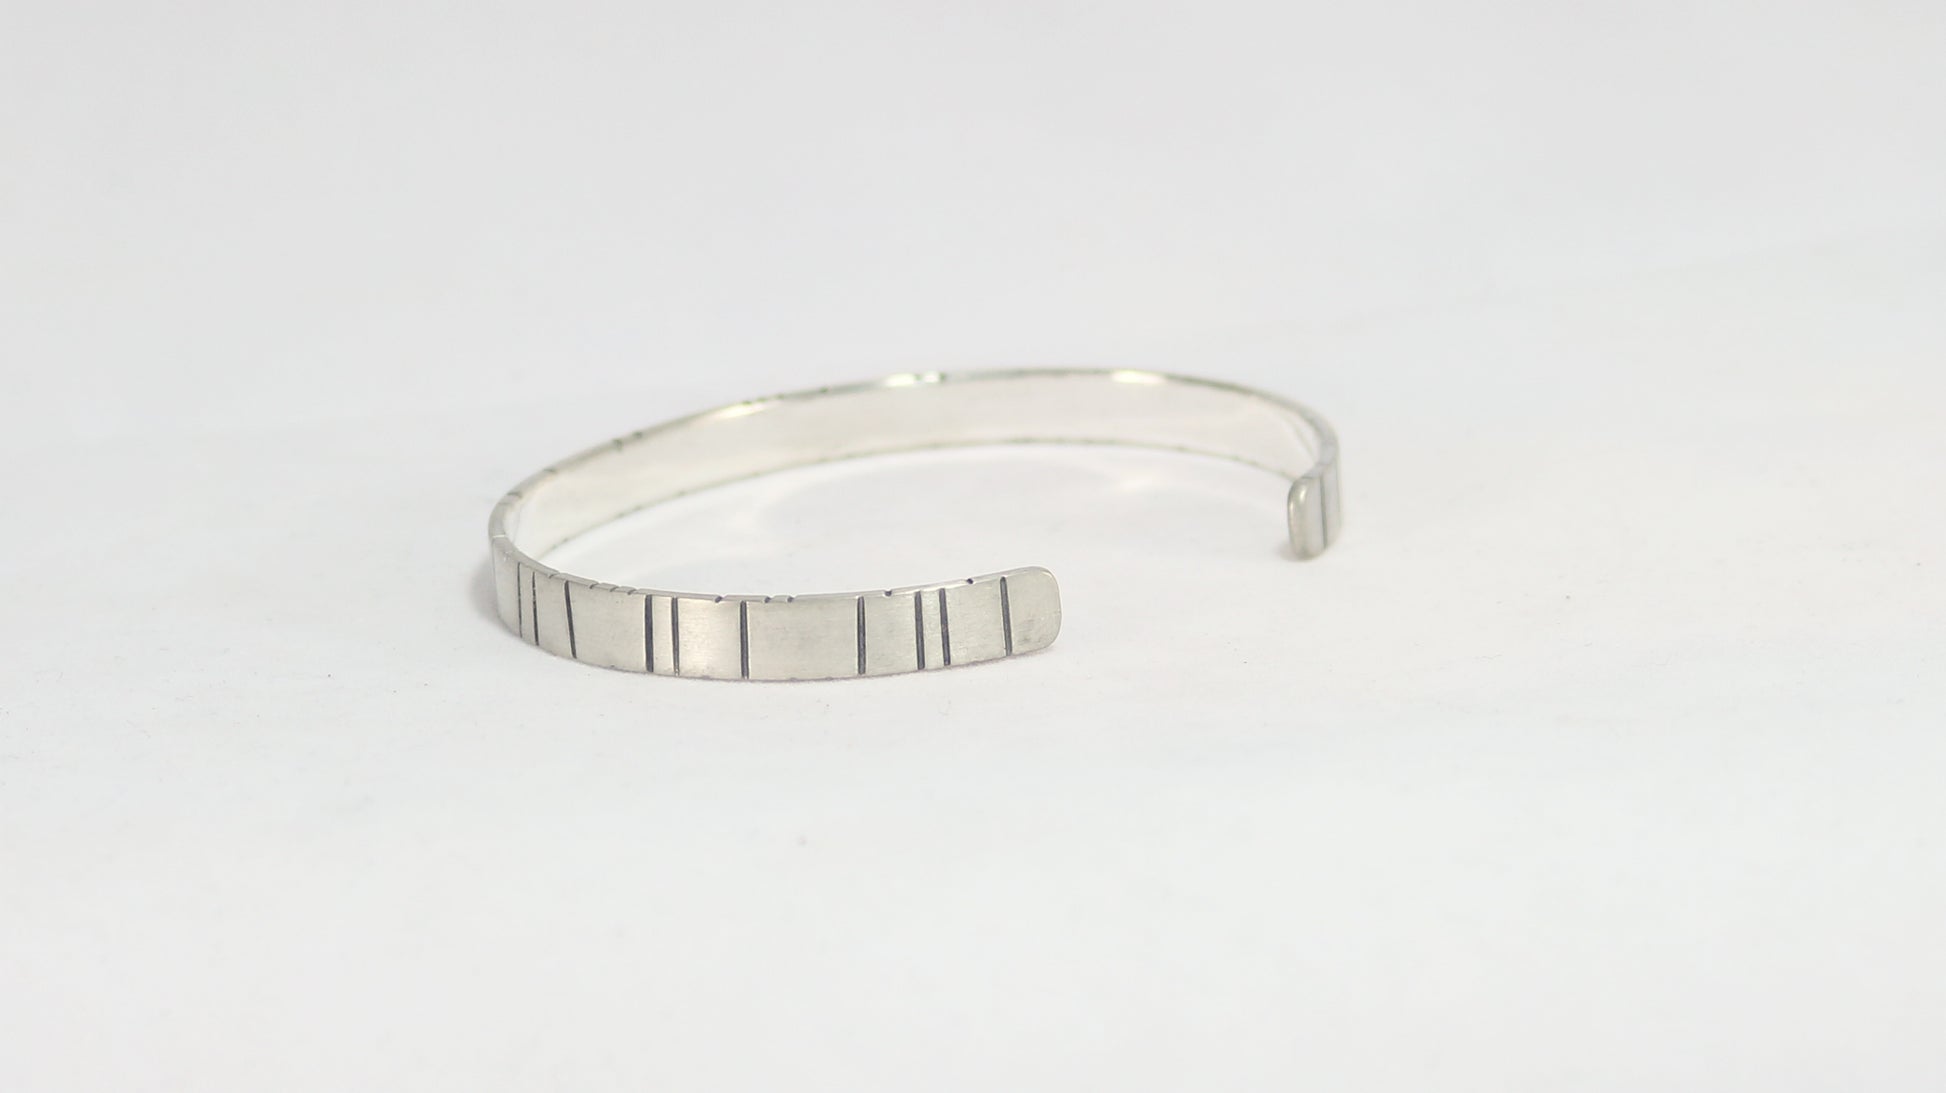 6mm sterling silver cuff with randomly spaced black lines.